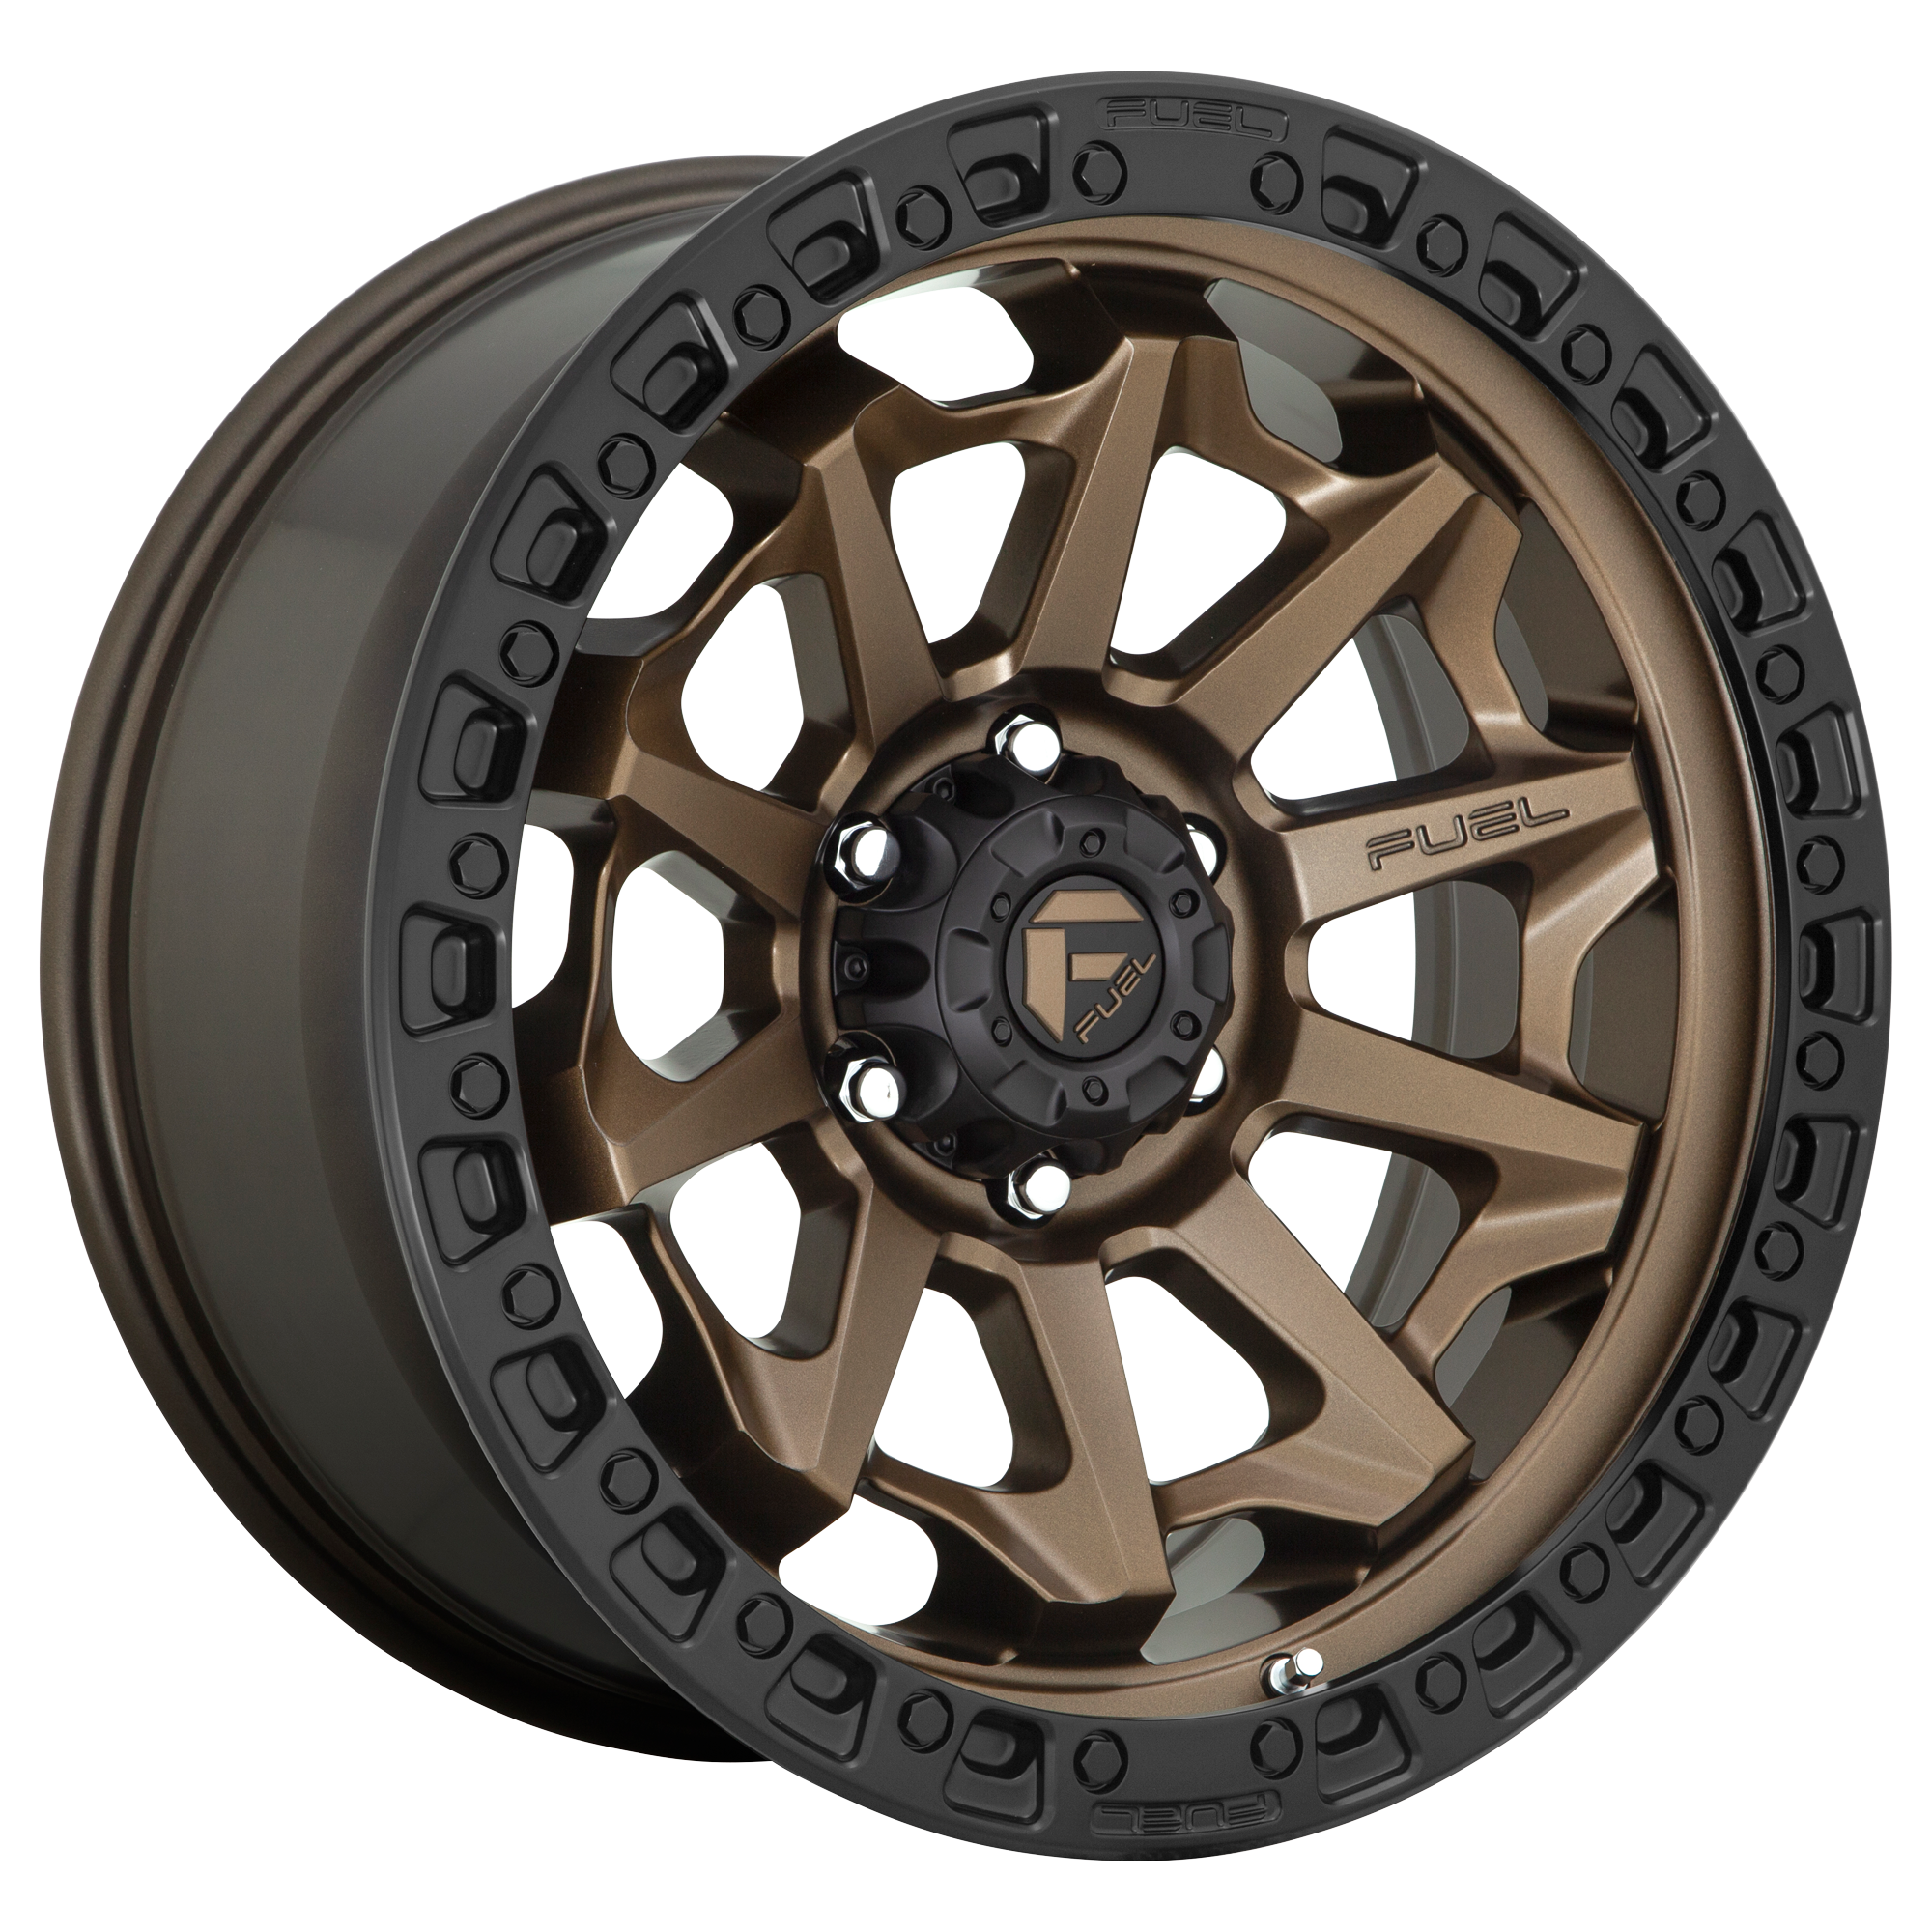 COVERT 20x10 6x139.70 MATTE BRONZE BLACK BEAD RING (-18 mm) - Tires and Engine Performance